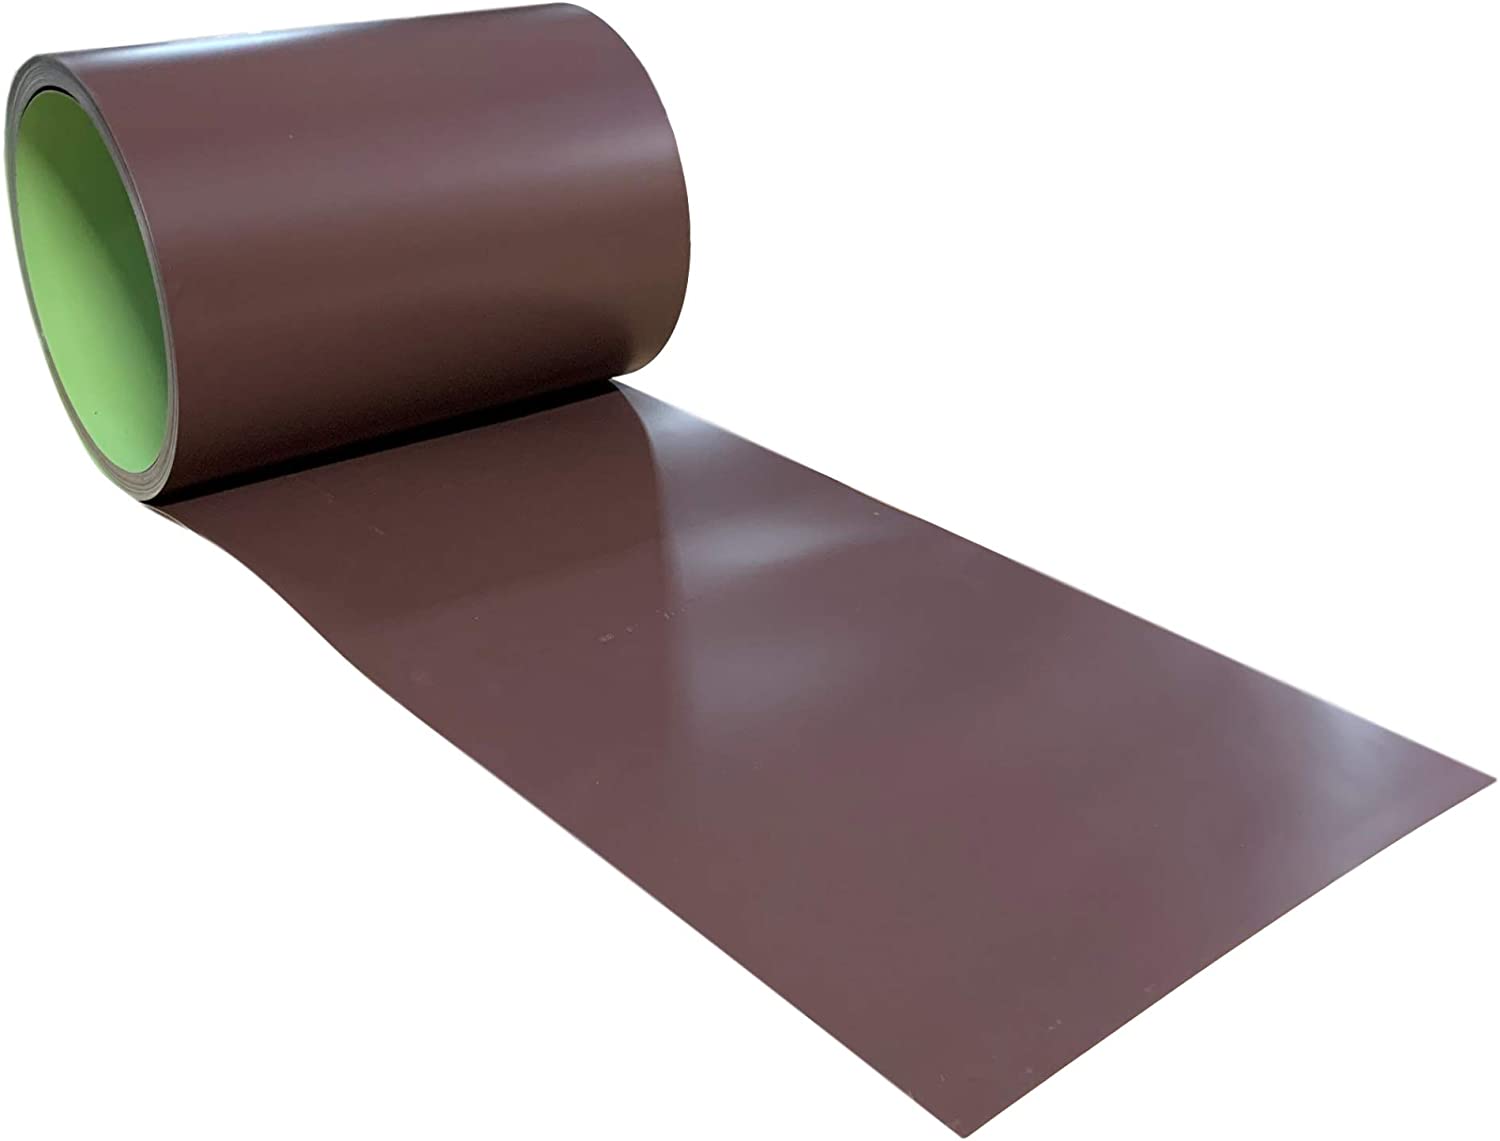 22-Gauge (.027) Heavy Duty Painted Aluminum Flashing Rolls Royal Brown / 10 ft / 15 Wide